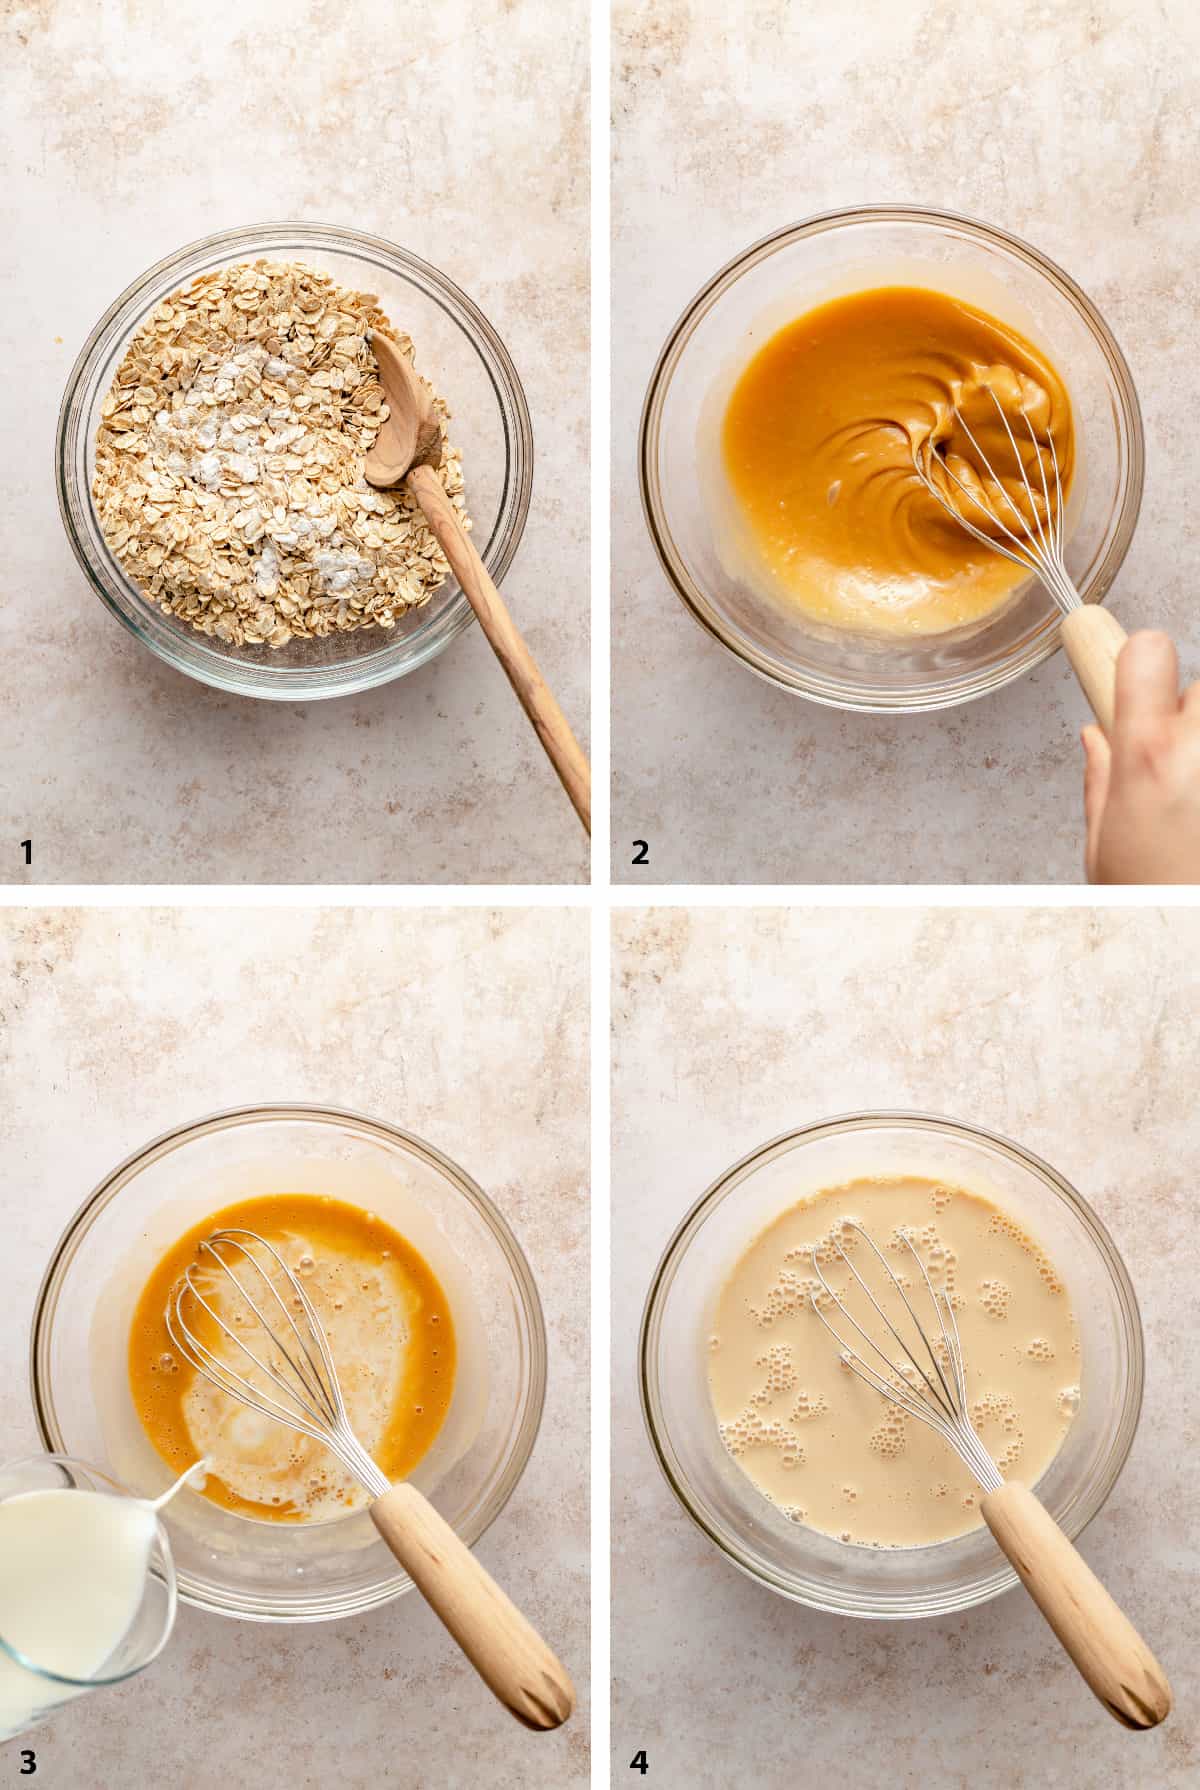 Process steps of creating the liquid ingredient mix for the baked oatmeal.